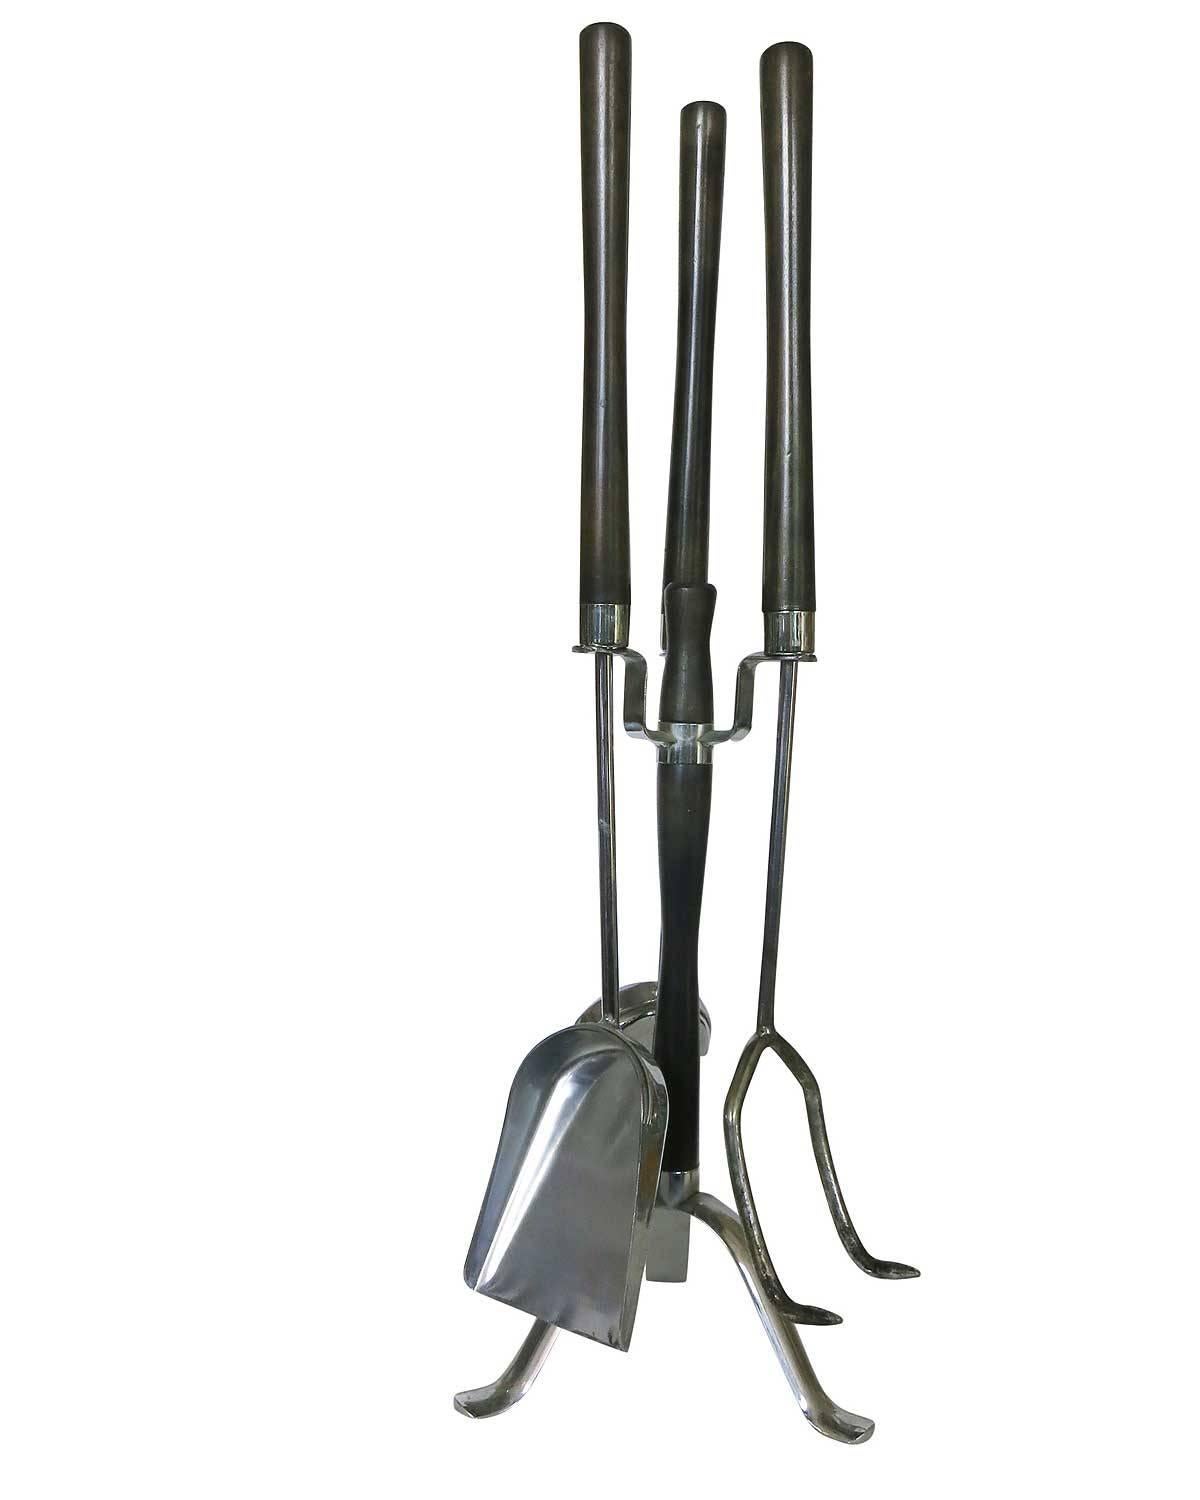 Set of four chrome and walnut fireplace tools by the Seymour Manufacturing Company. This unique set features a floating Jet age stand with poker, brush, and shovel.
Measures:
Broom: 29.5inches L x 4.5inches W x 4inches H.
Poker: 29.5inches L x